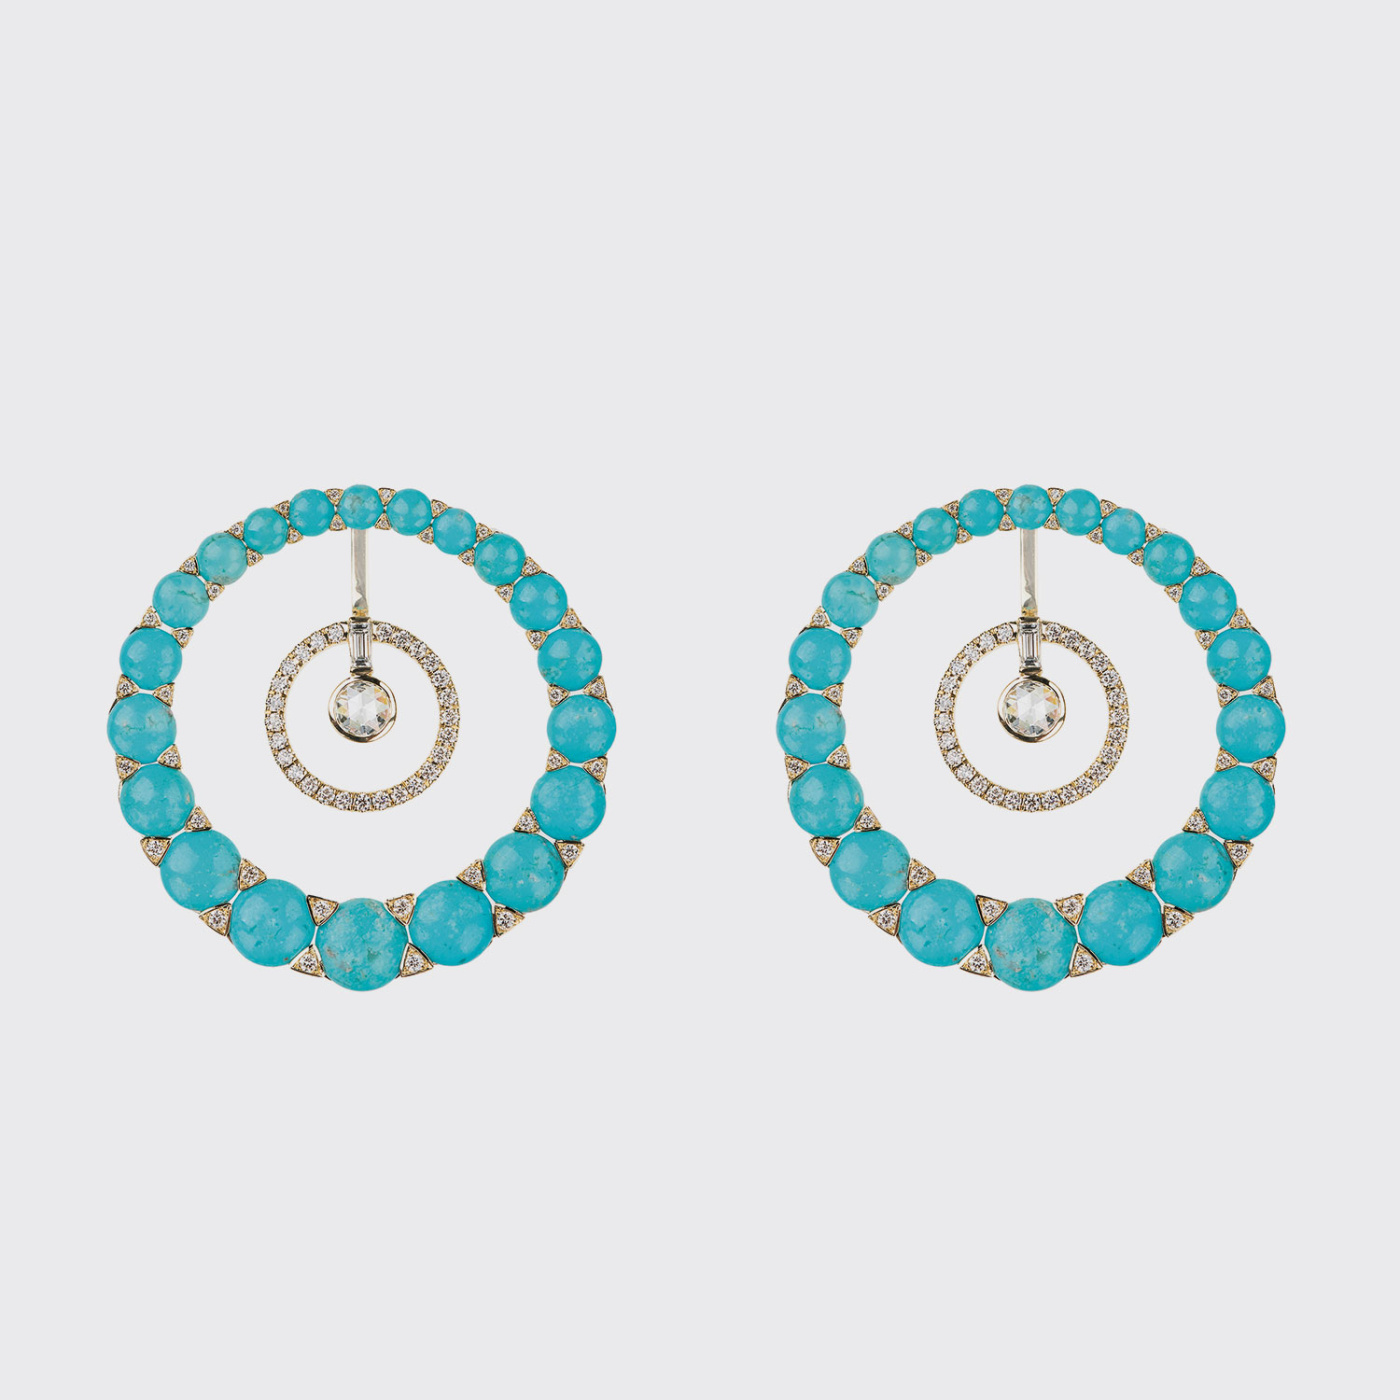 Yellow gold hoop earrings with white diamonds and turquoises